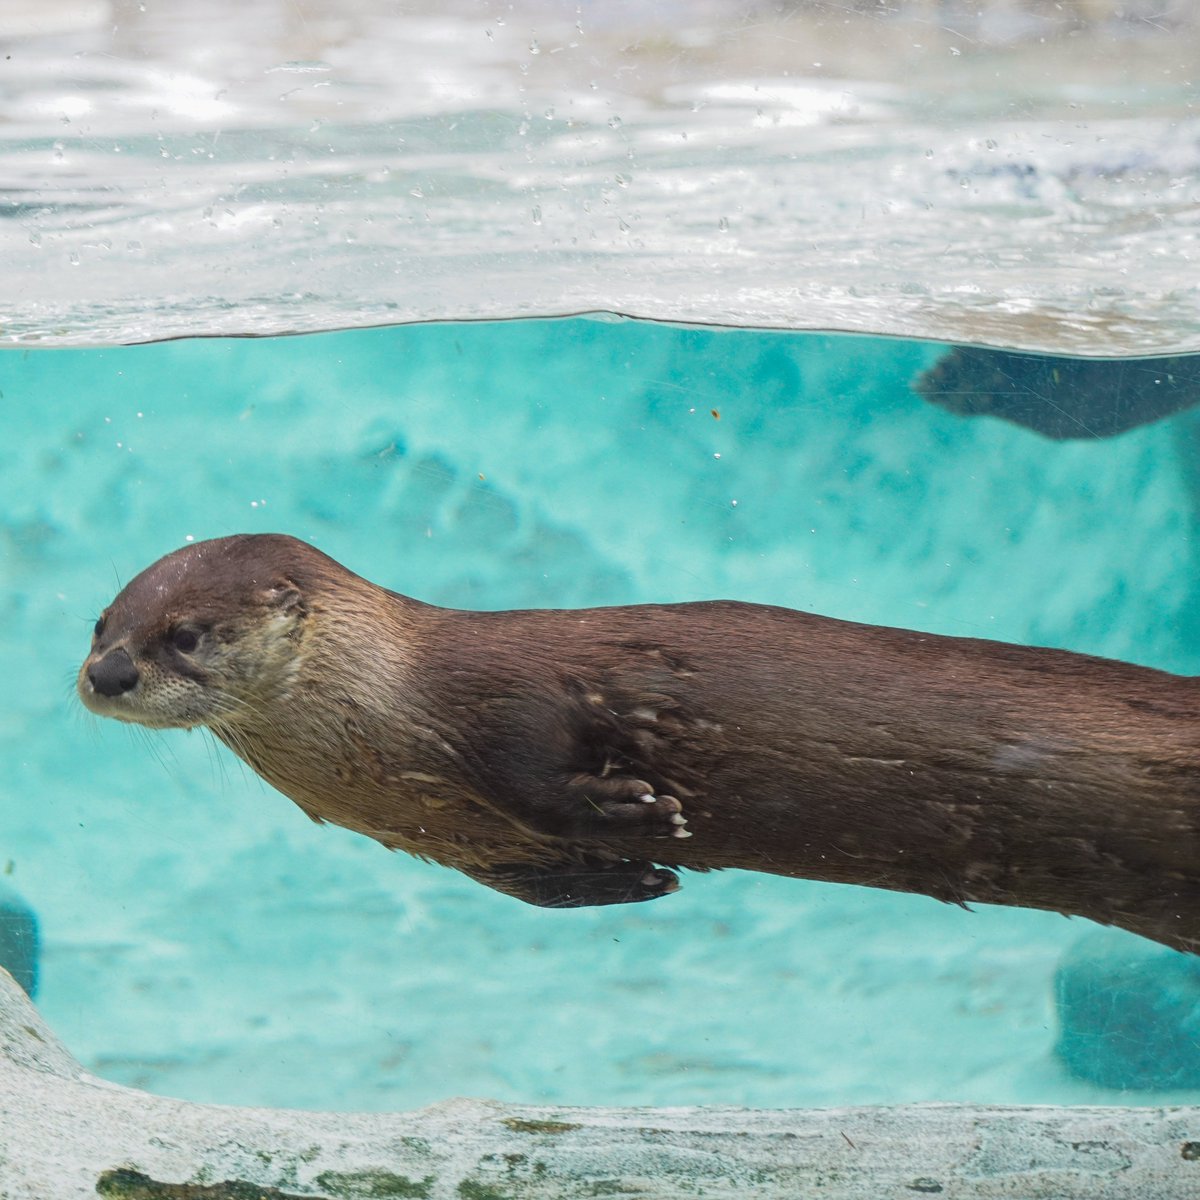 Forget mittens & sweaters, river otters have cracked the code to winter fun! ❄️🦦 Their secret weapon? A double-layered coat that's like a built-in wetsuit. A toasty warm under layer & a water-resistant outer layer!